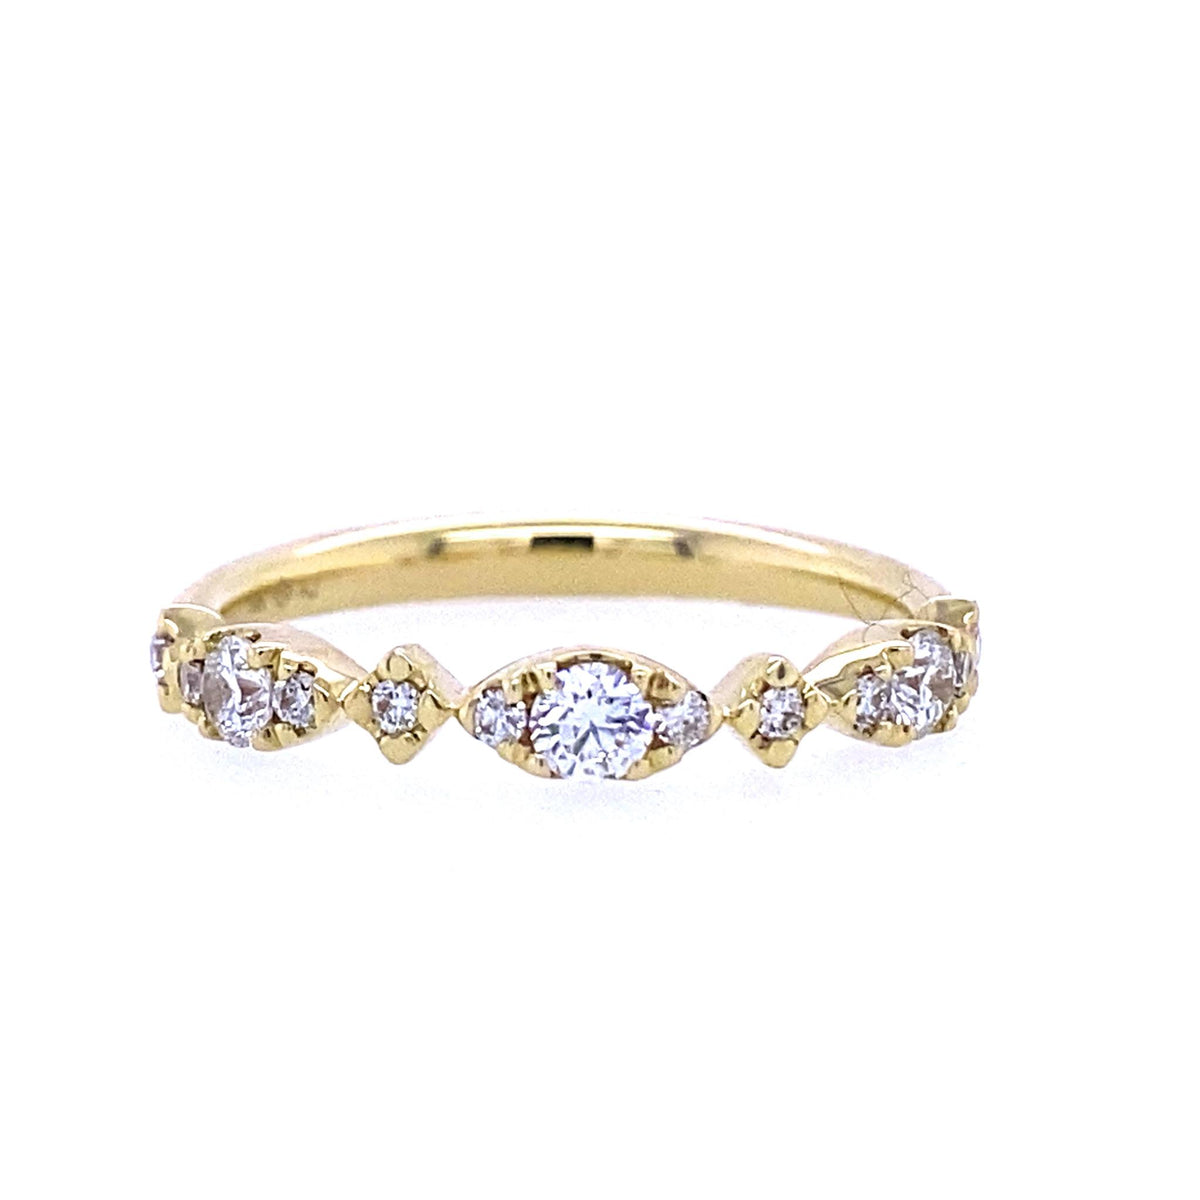 14Kt Yellow Gold Stackable Wedding Ring With 0.33cttw Natural Diamonds